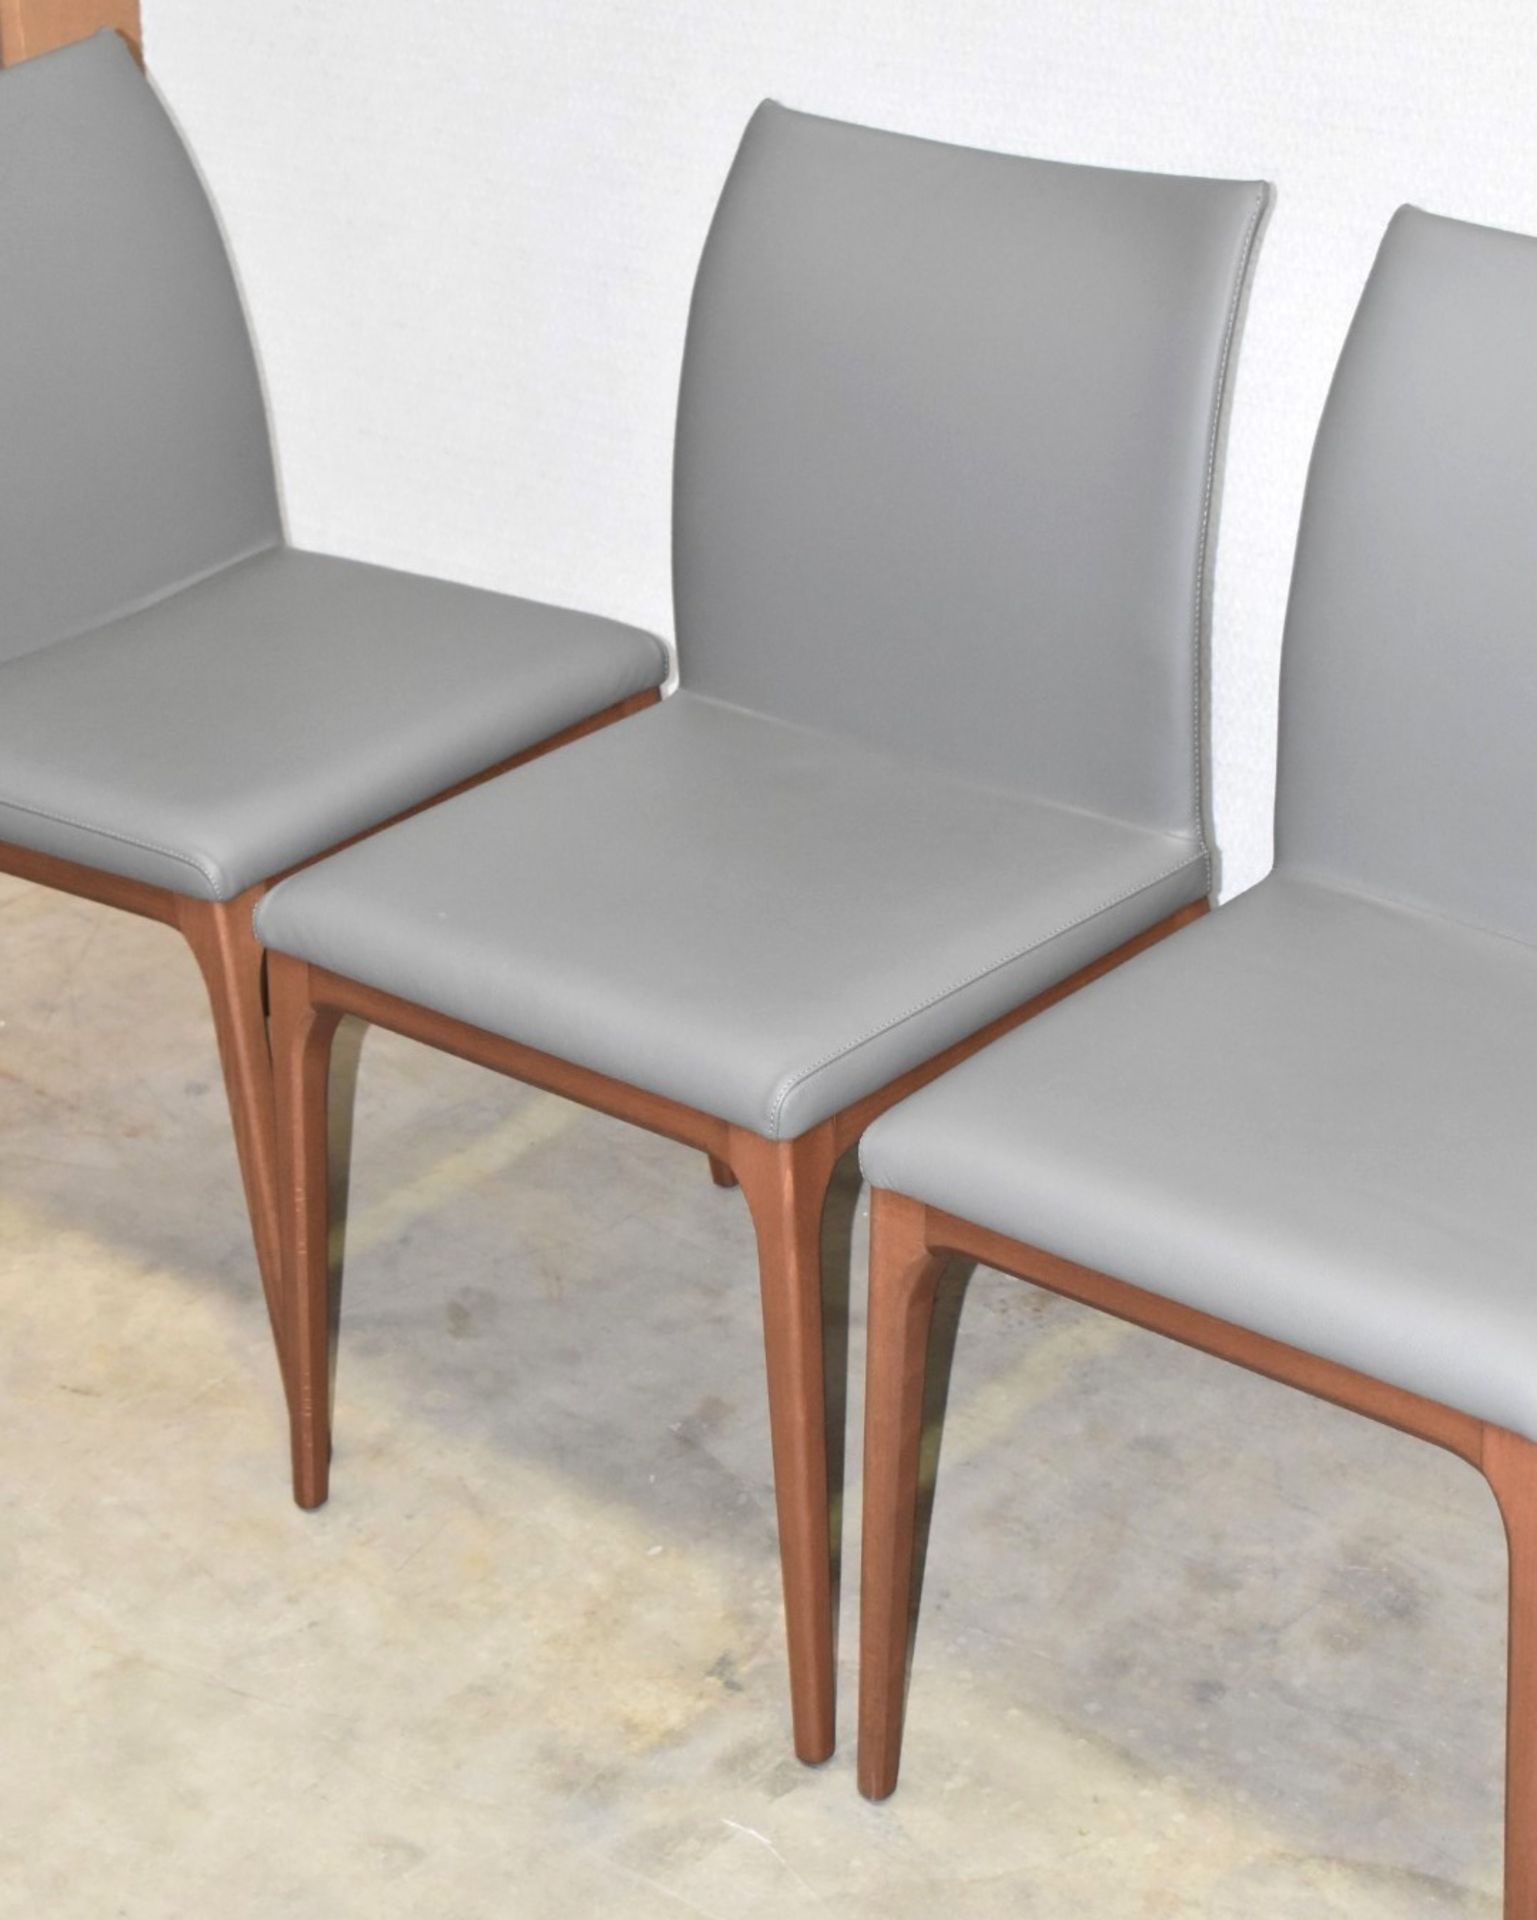 4 x CATTELAN ITALIA 'Arcadia Couture' Leather Upholstered Dining Chairs - Total Original RRP £3,540 - Image 17 of 19